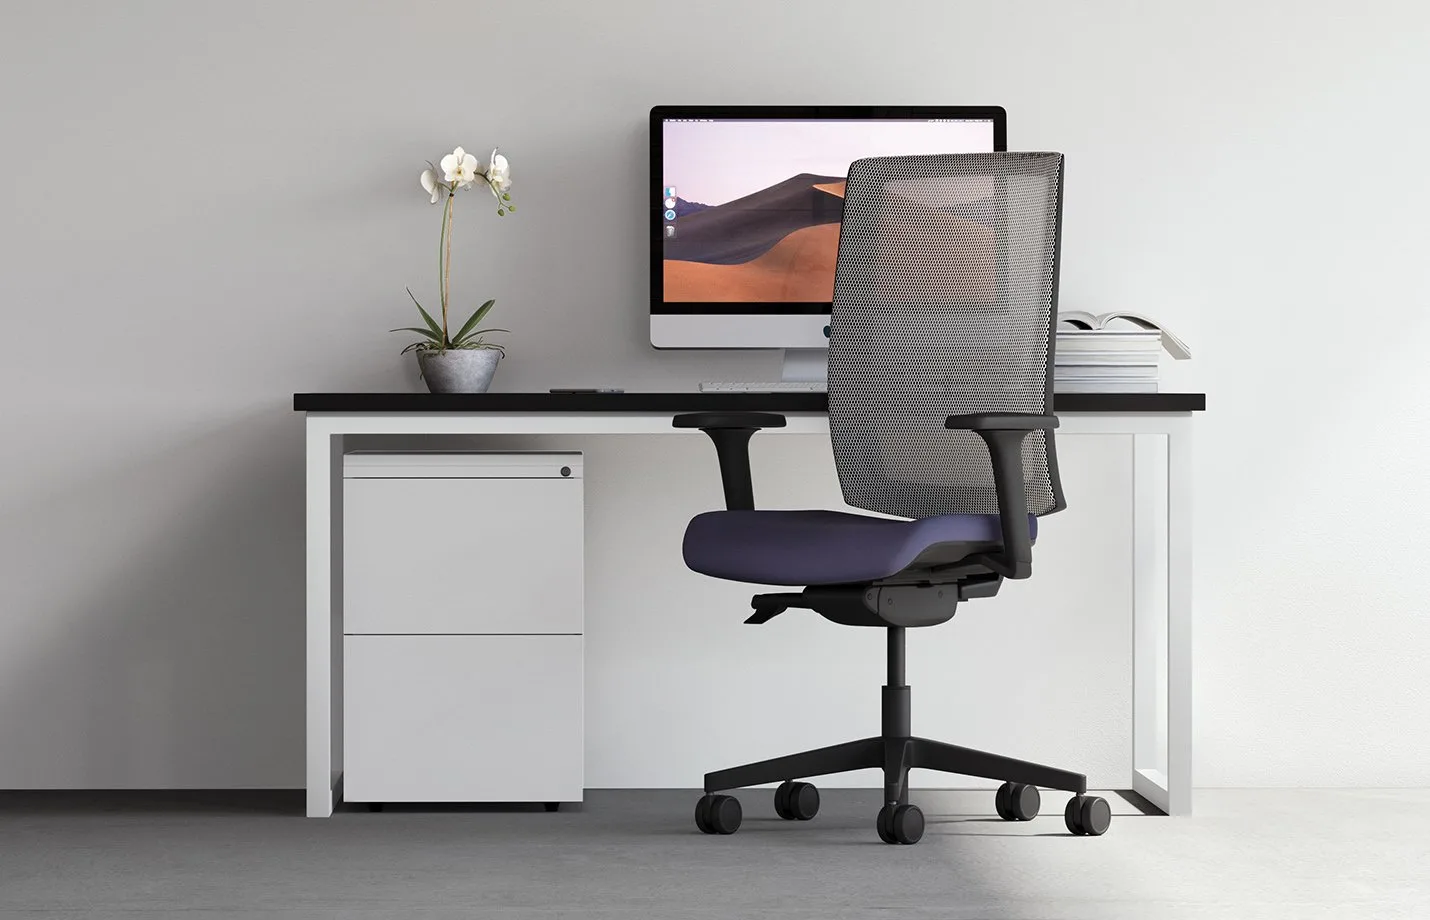 office contract furniture consisting of work desk, task chair and storage